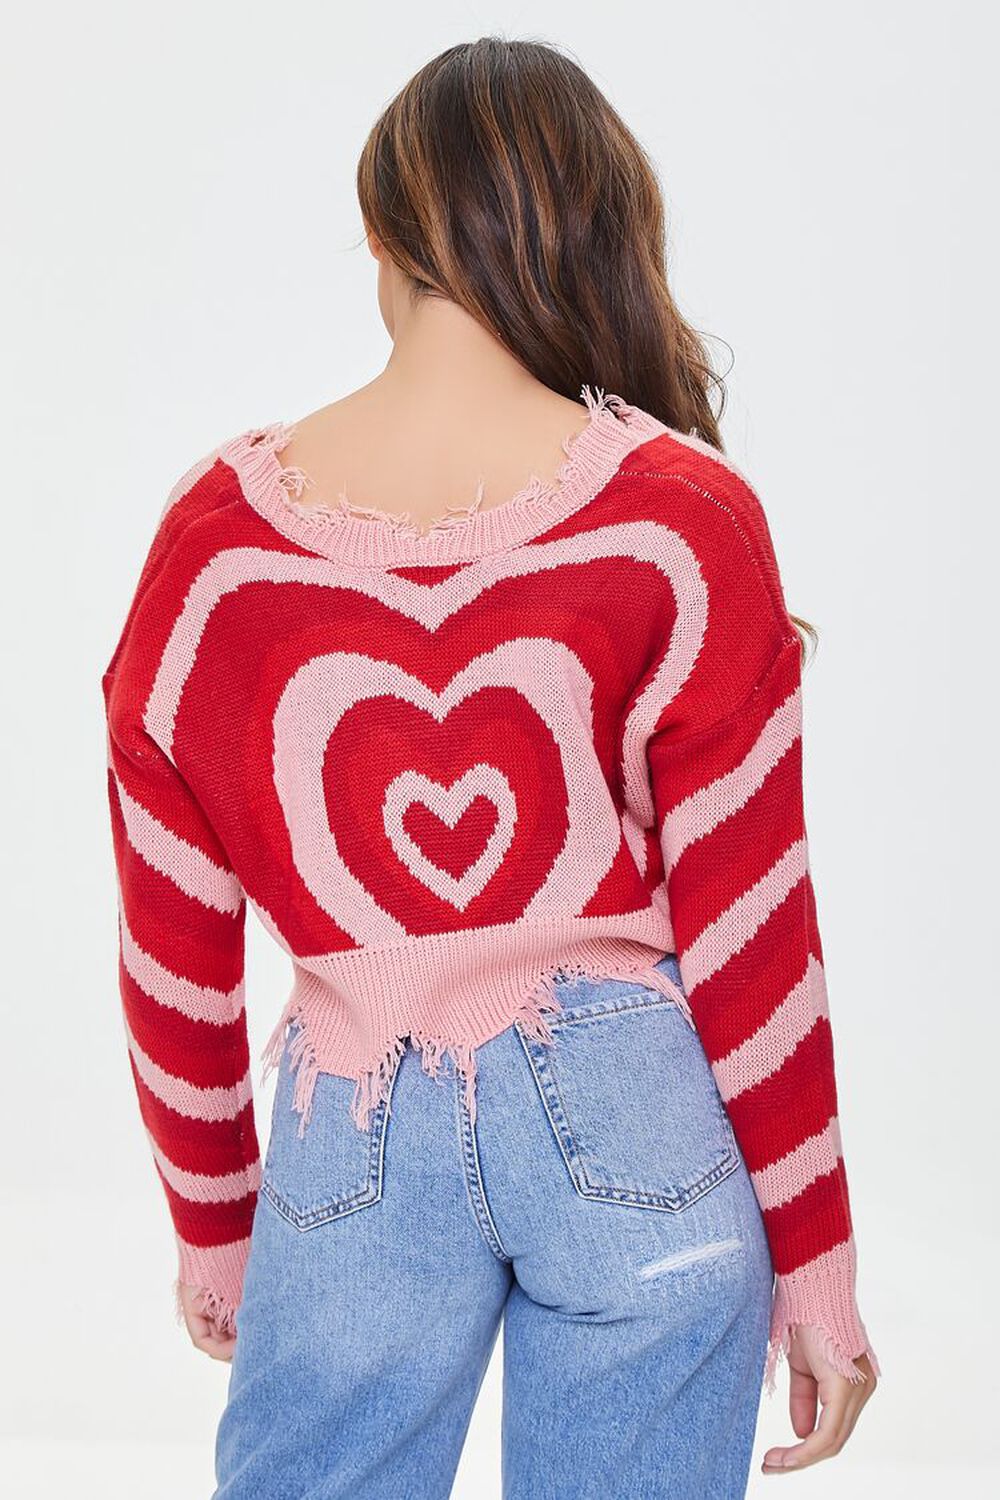 RED/MULTI Frayed Heart Sweater, image 3